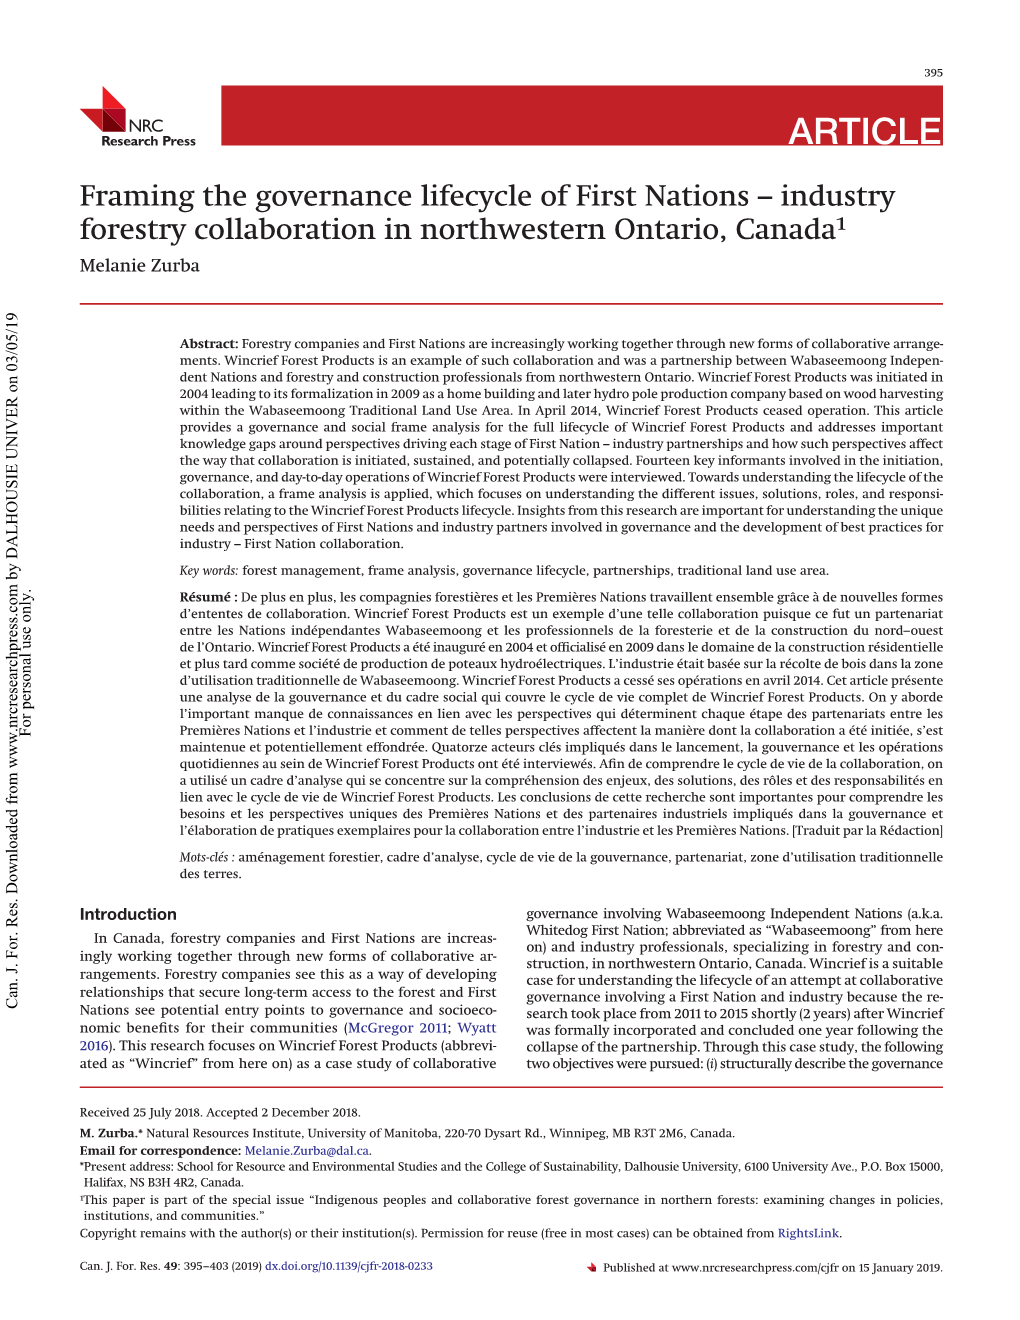 Framing the Governance Lifecycle of First Nations – Industry Forestry Collaboration in Northwestern Ontario, Canada1 Melanie Zurba